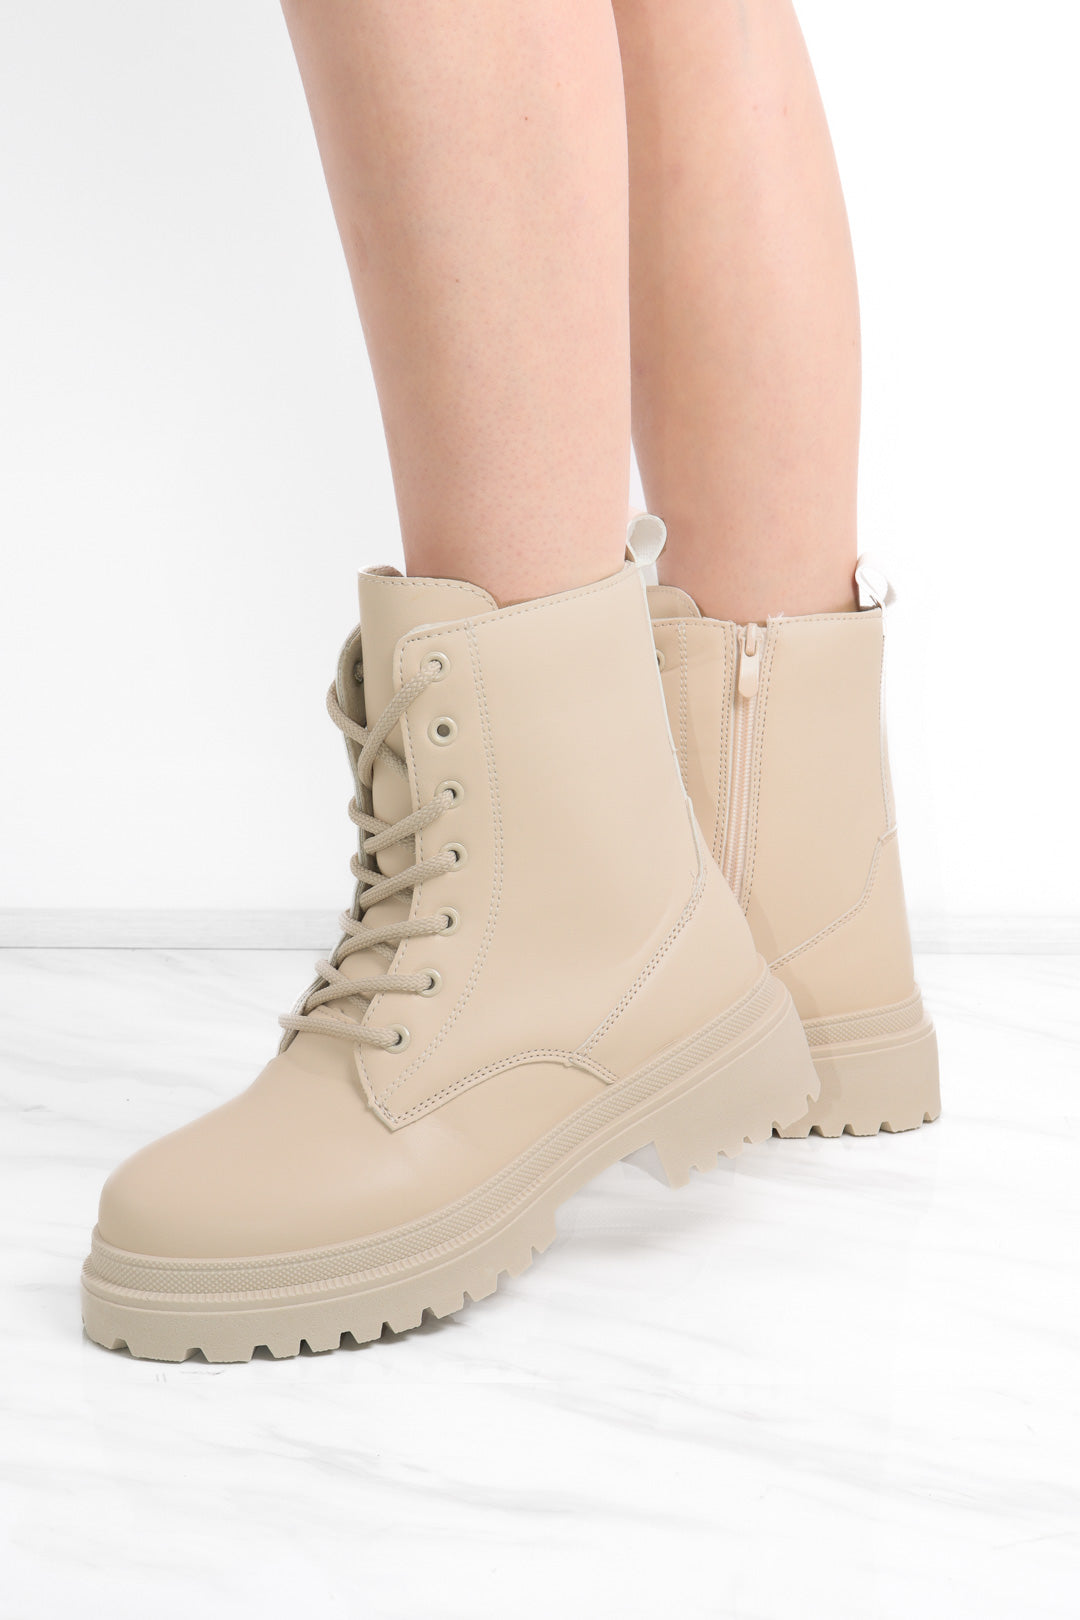 Beige Matte Faux Leather Side Zip Lace Up Boot